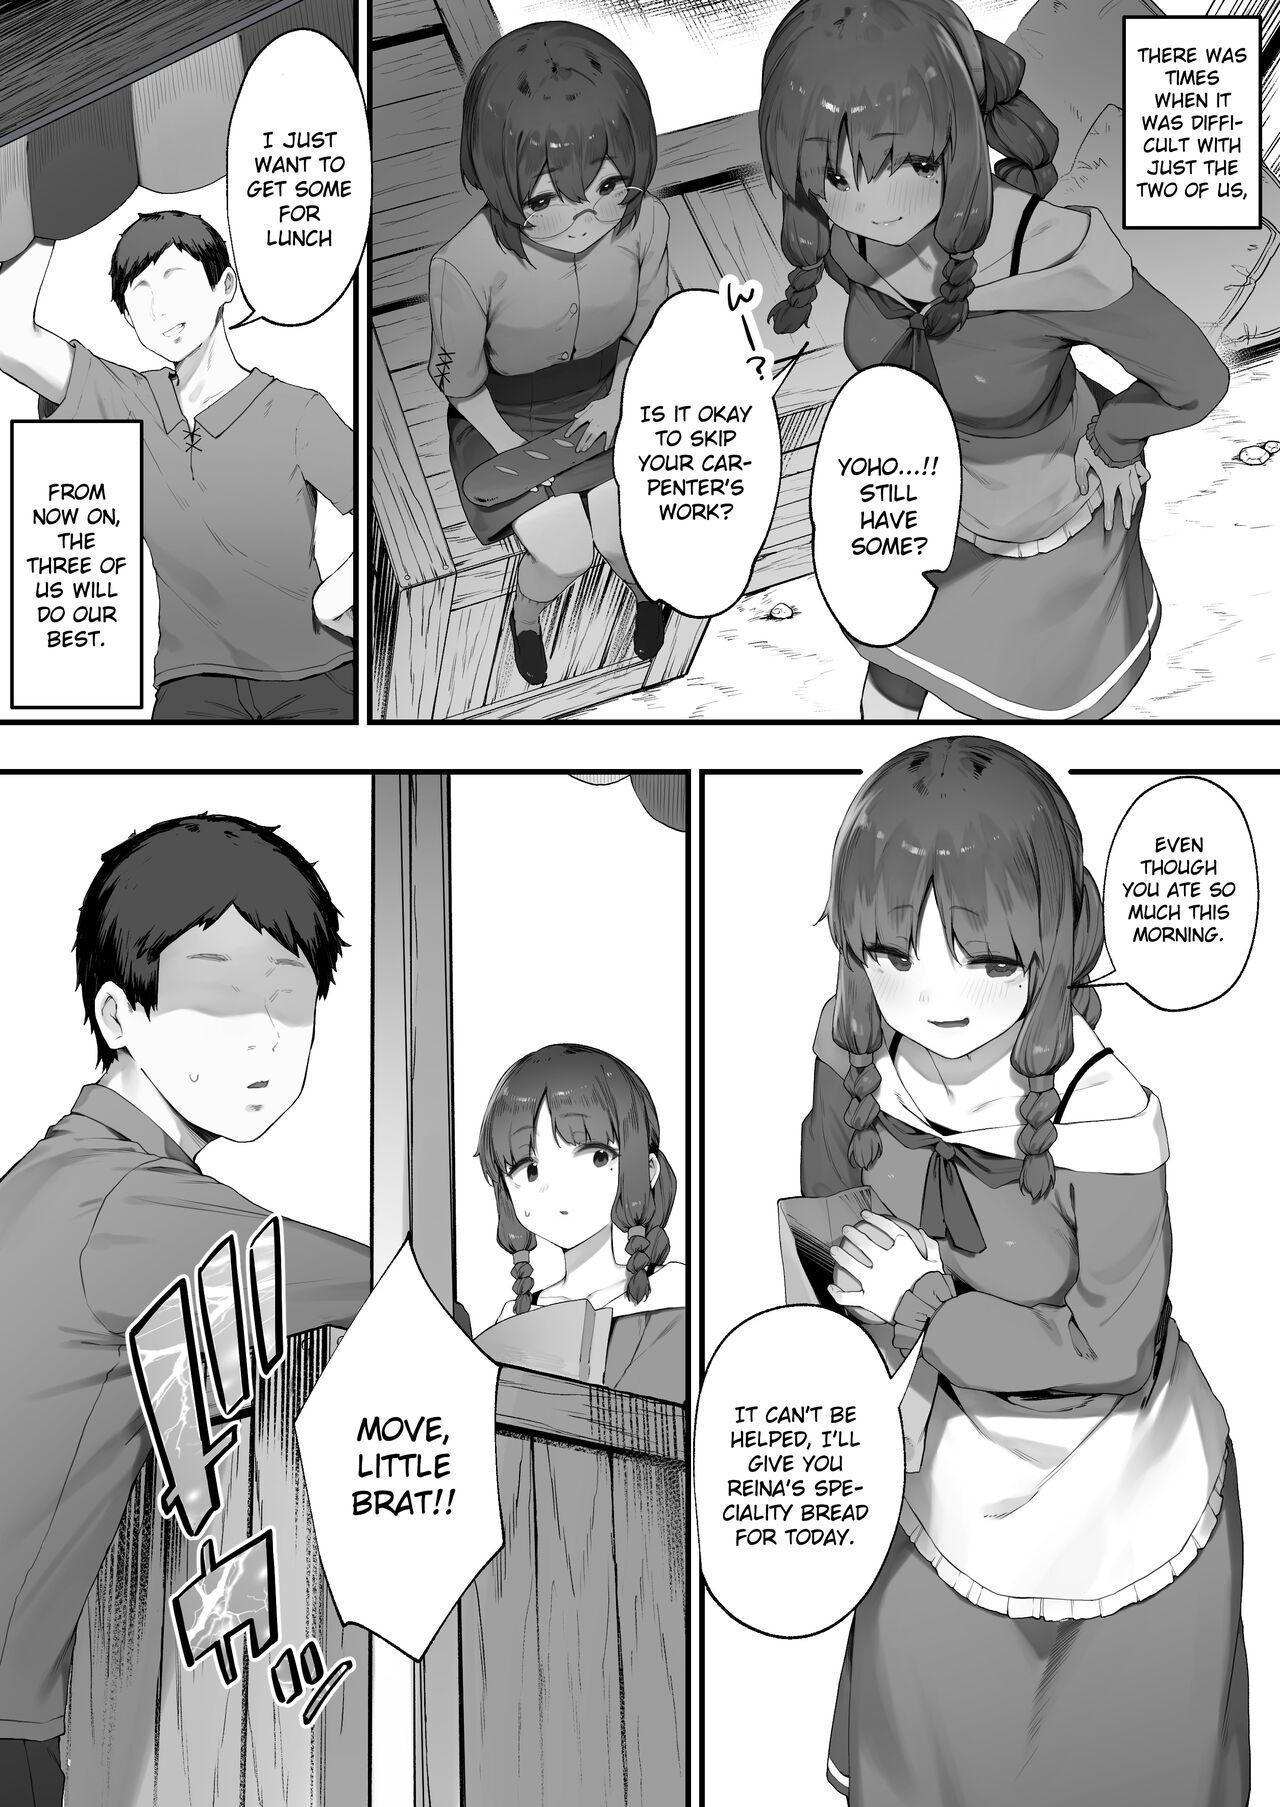 Cougar Oujo no Meirei de Stalker to Kekkon Saserareru Hanashi 1 | A story about being married to a stalker by the order of a princess 1 - Original Flaquita - Page 3